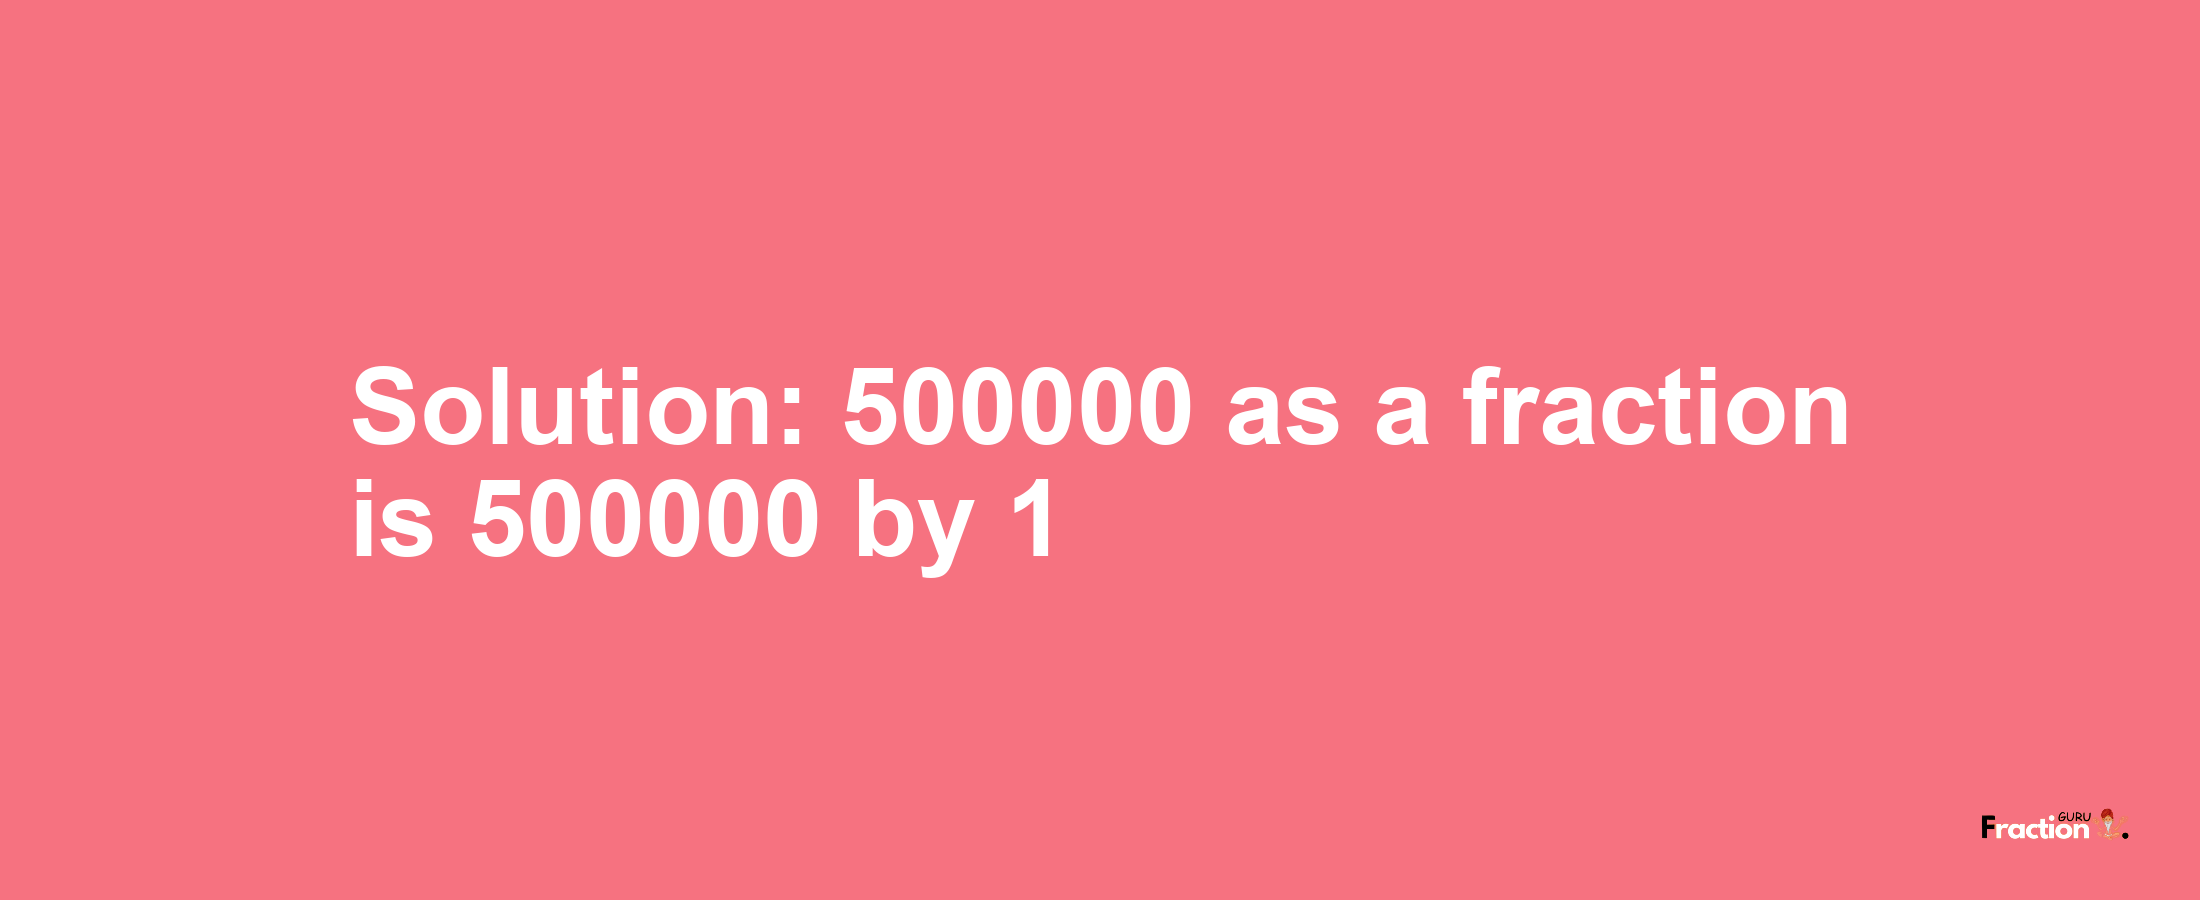 Solution:500000 as a fraction is 500000/1